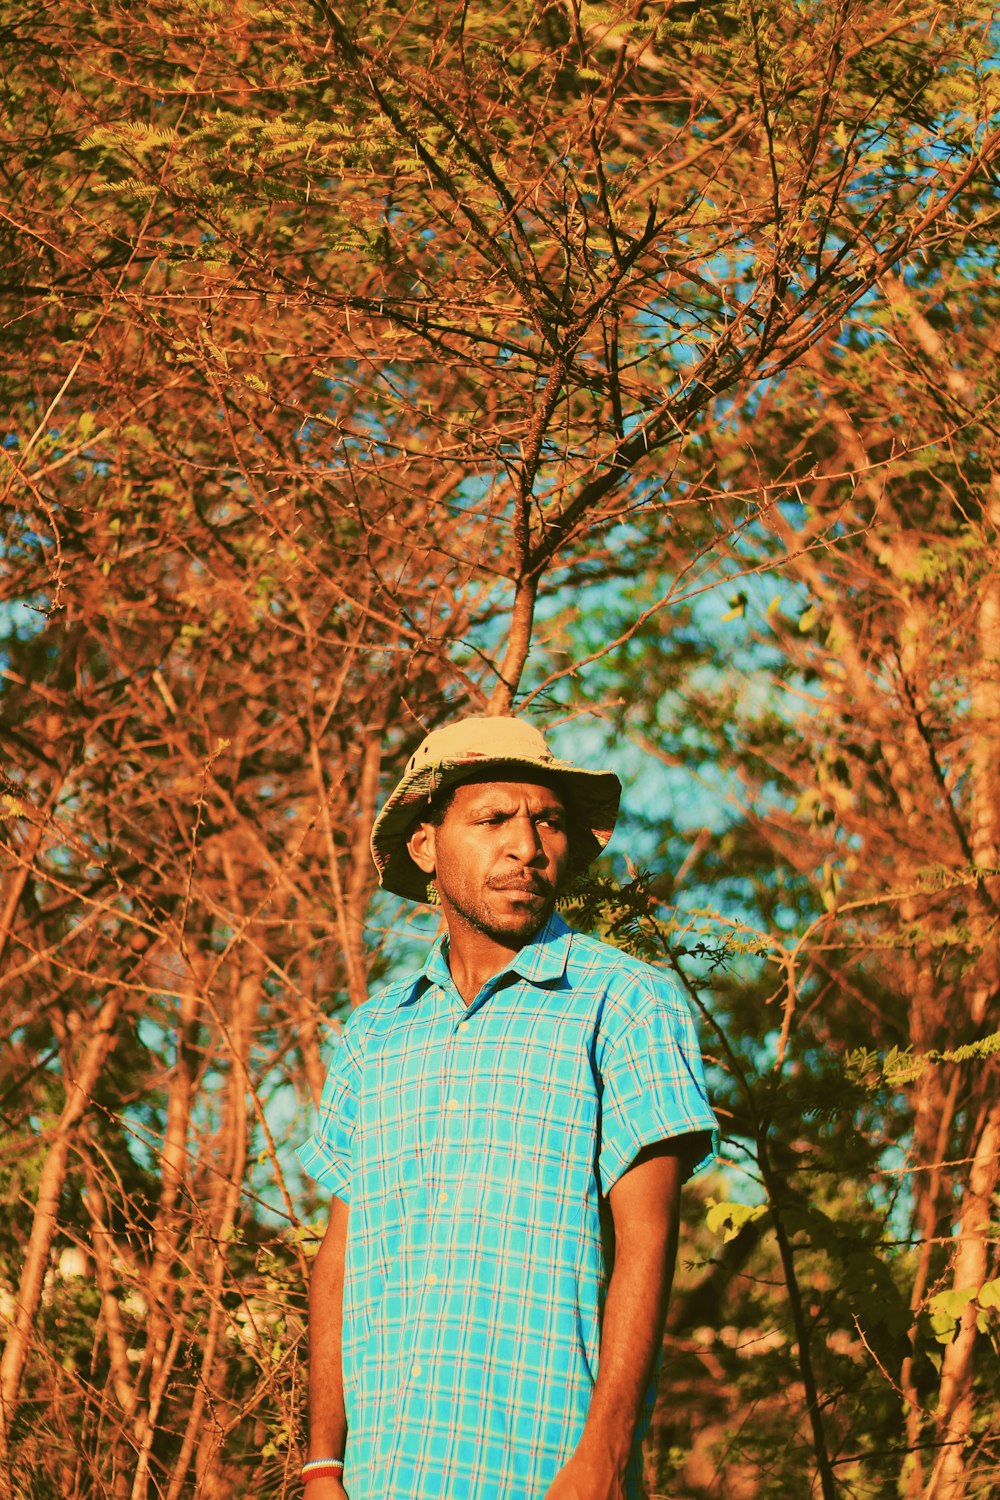 man in blue and white checkered button up shirt wearing brown hat standing near brown leaf